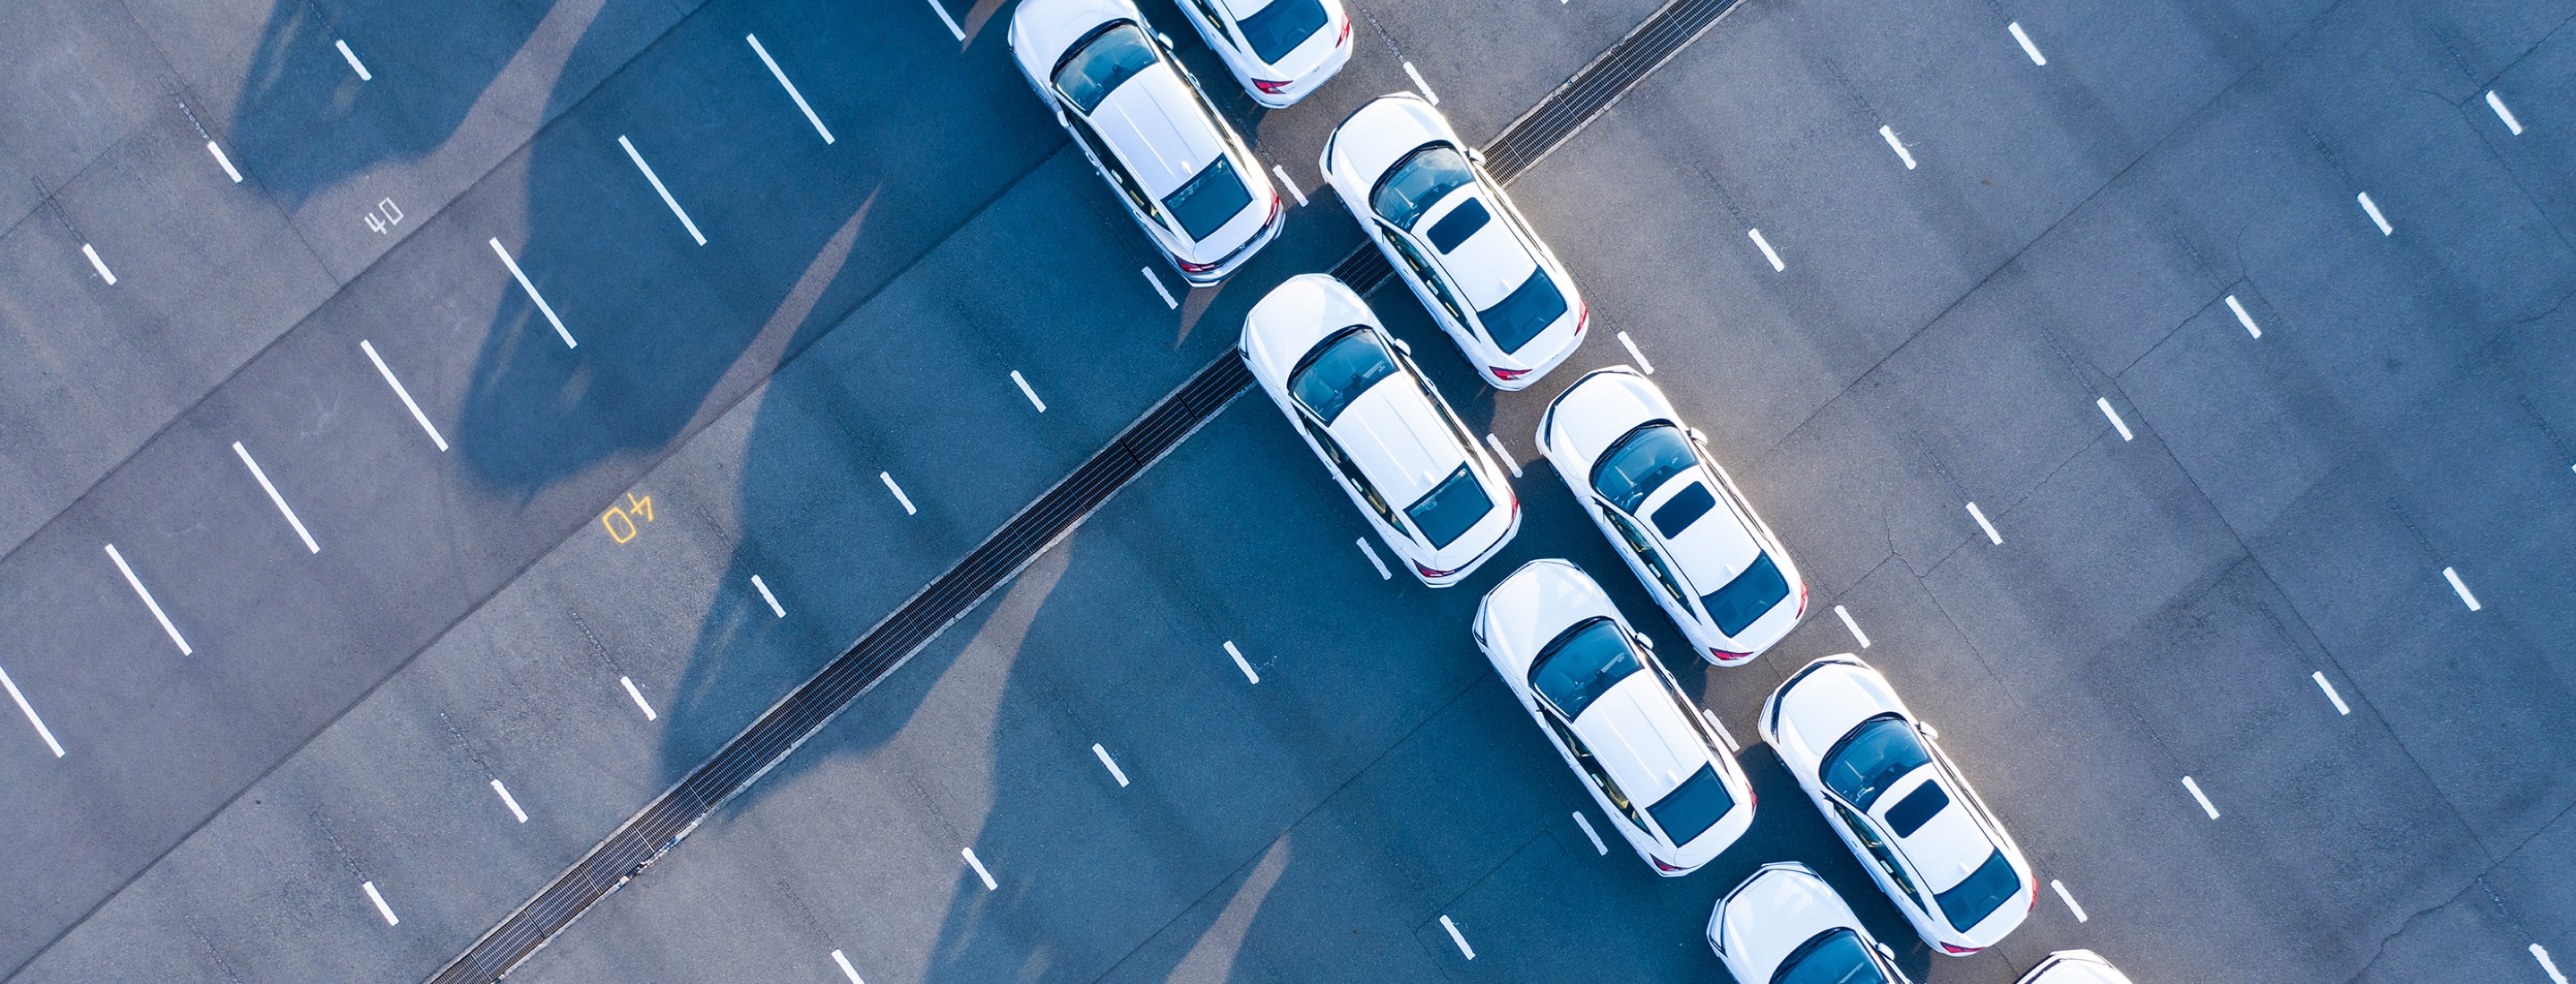 Aerial image of two rows of white vehicles lined up in a parking lot